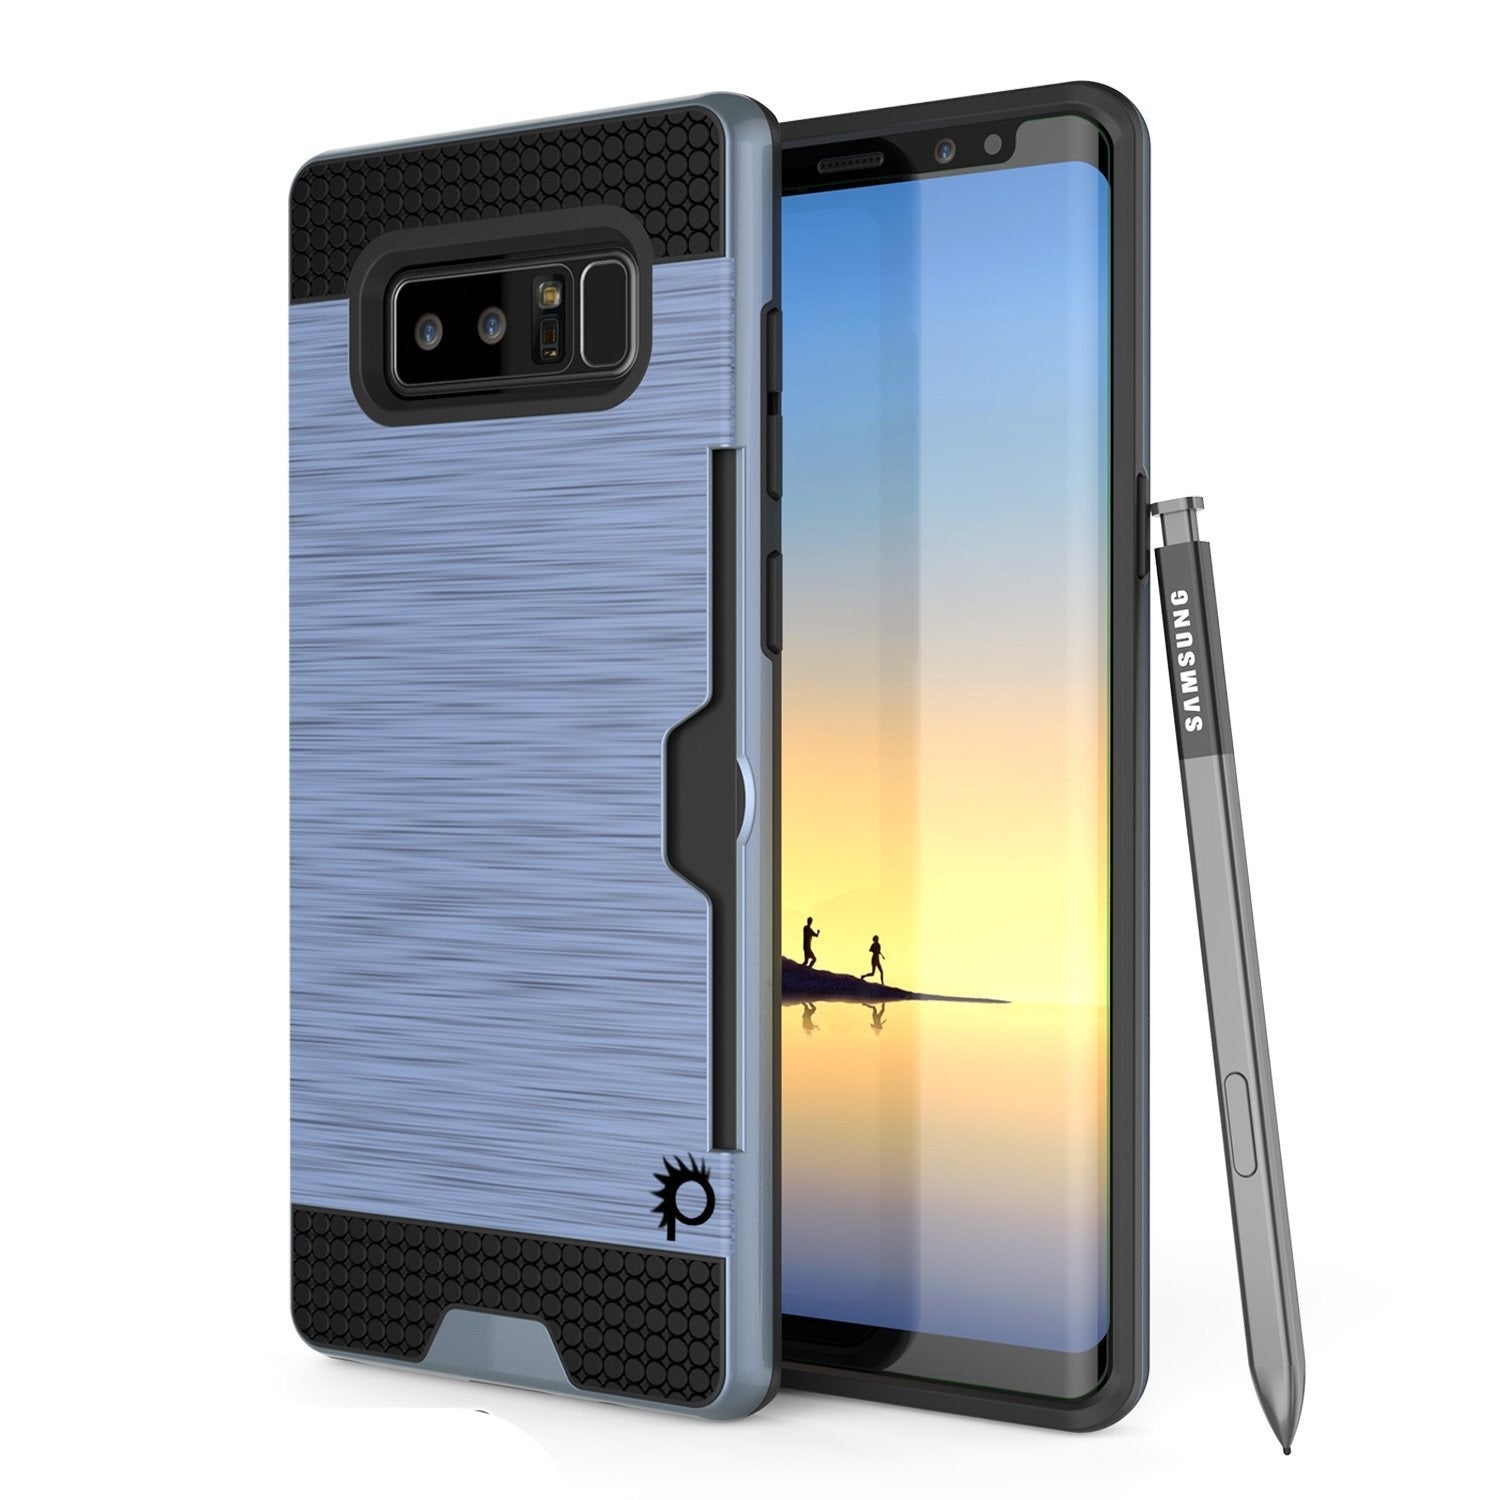 Galaxy Note 8 Case, Punkcase [SLOT Series] Slim Fit  Note 8  [Grey]